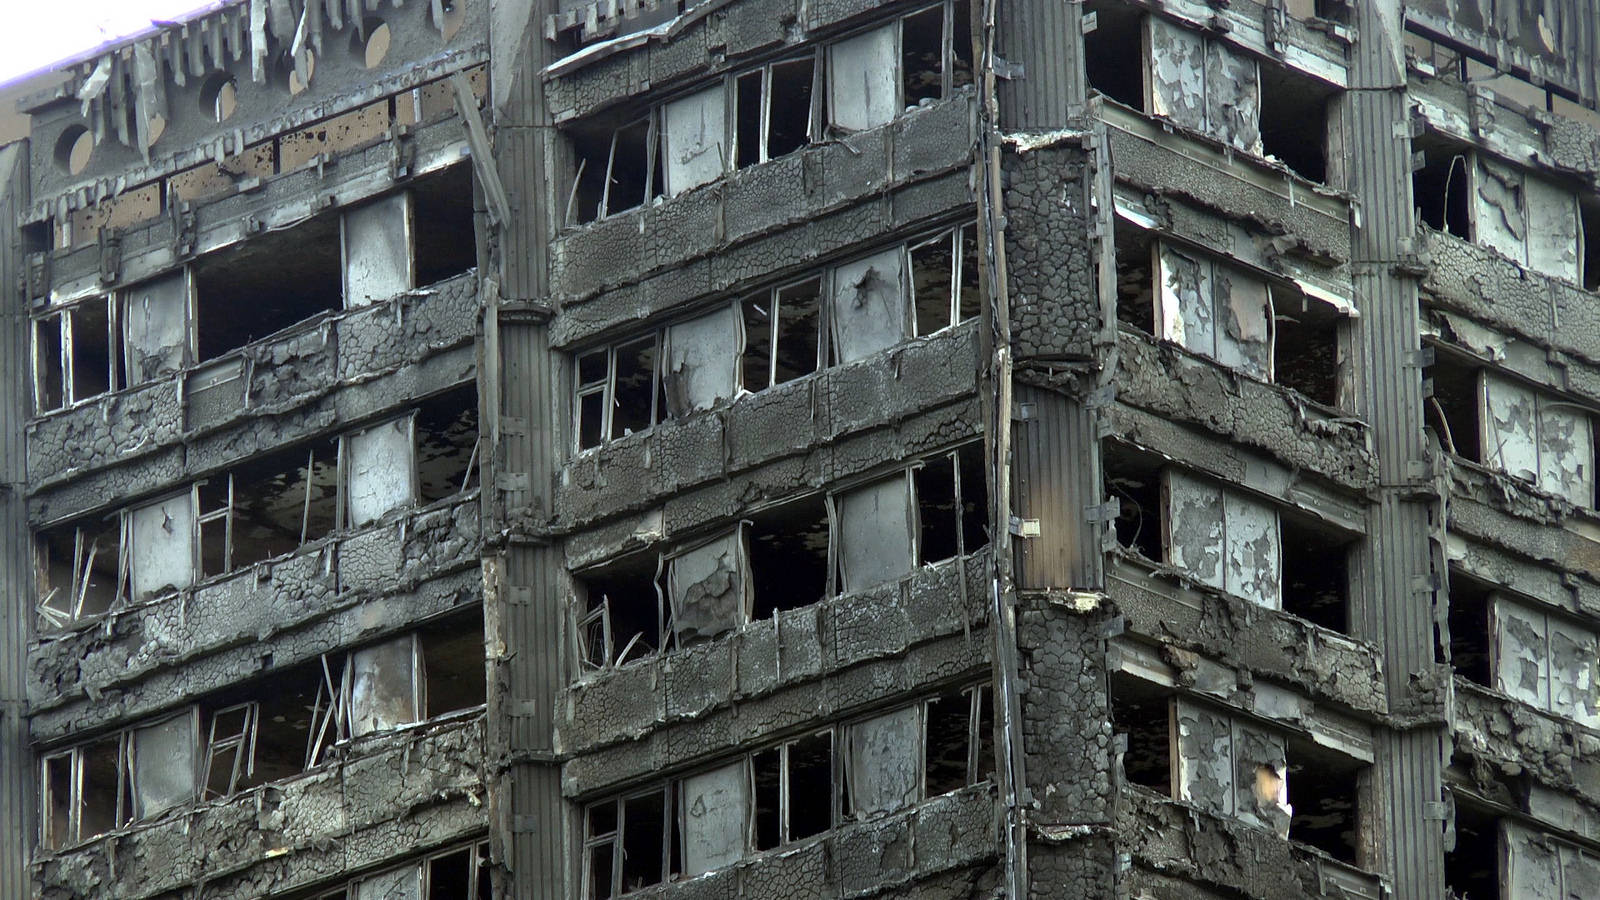 What are the terms of the immigration “amnesty” for survivors of the Grenfell Tower disaster?